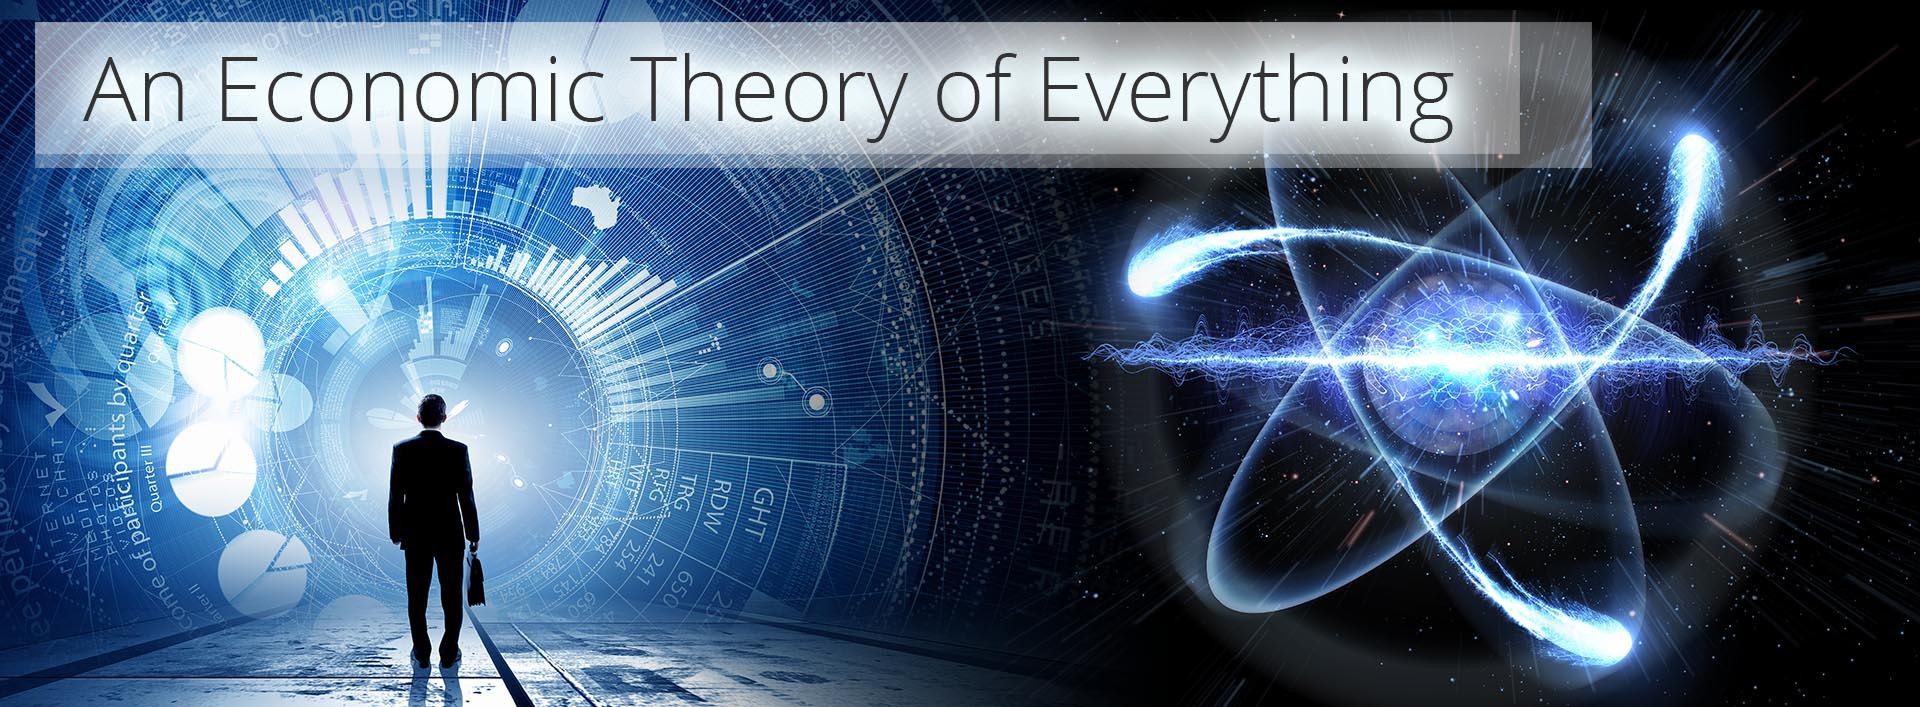 An Economic Theory of Everything